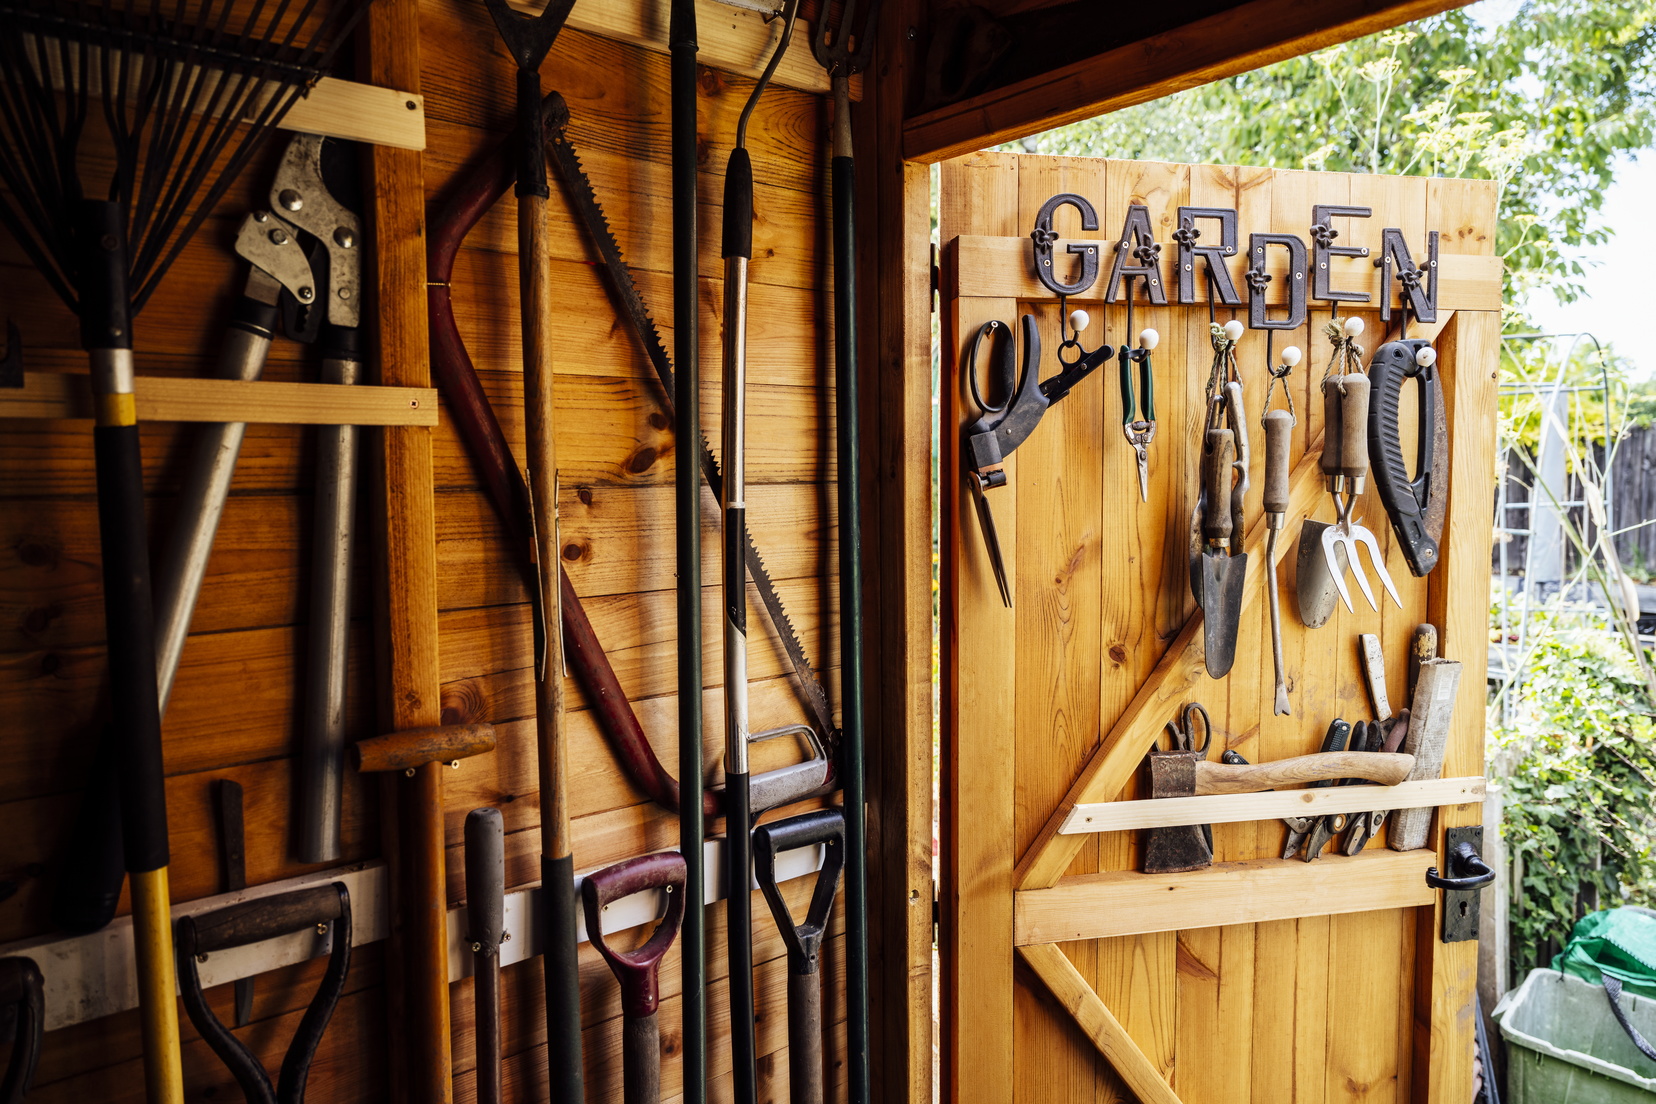 Interior of wooden gardening shed with neatly arranged tools